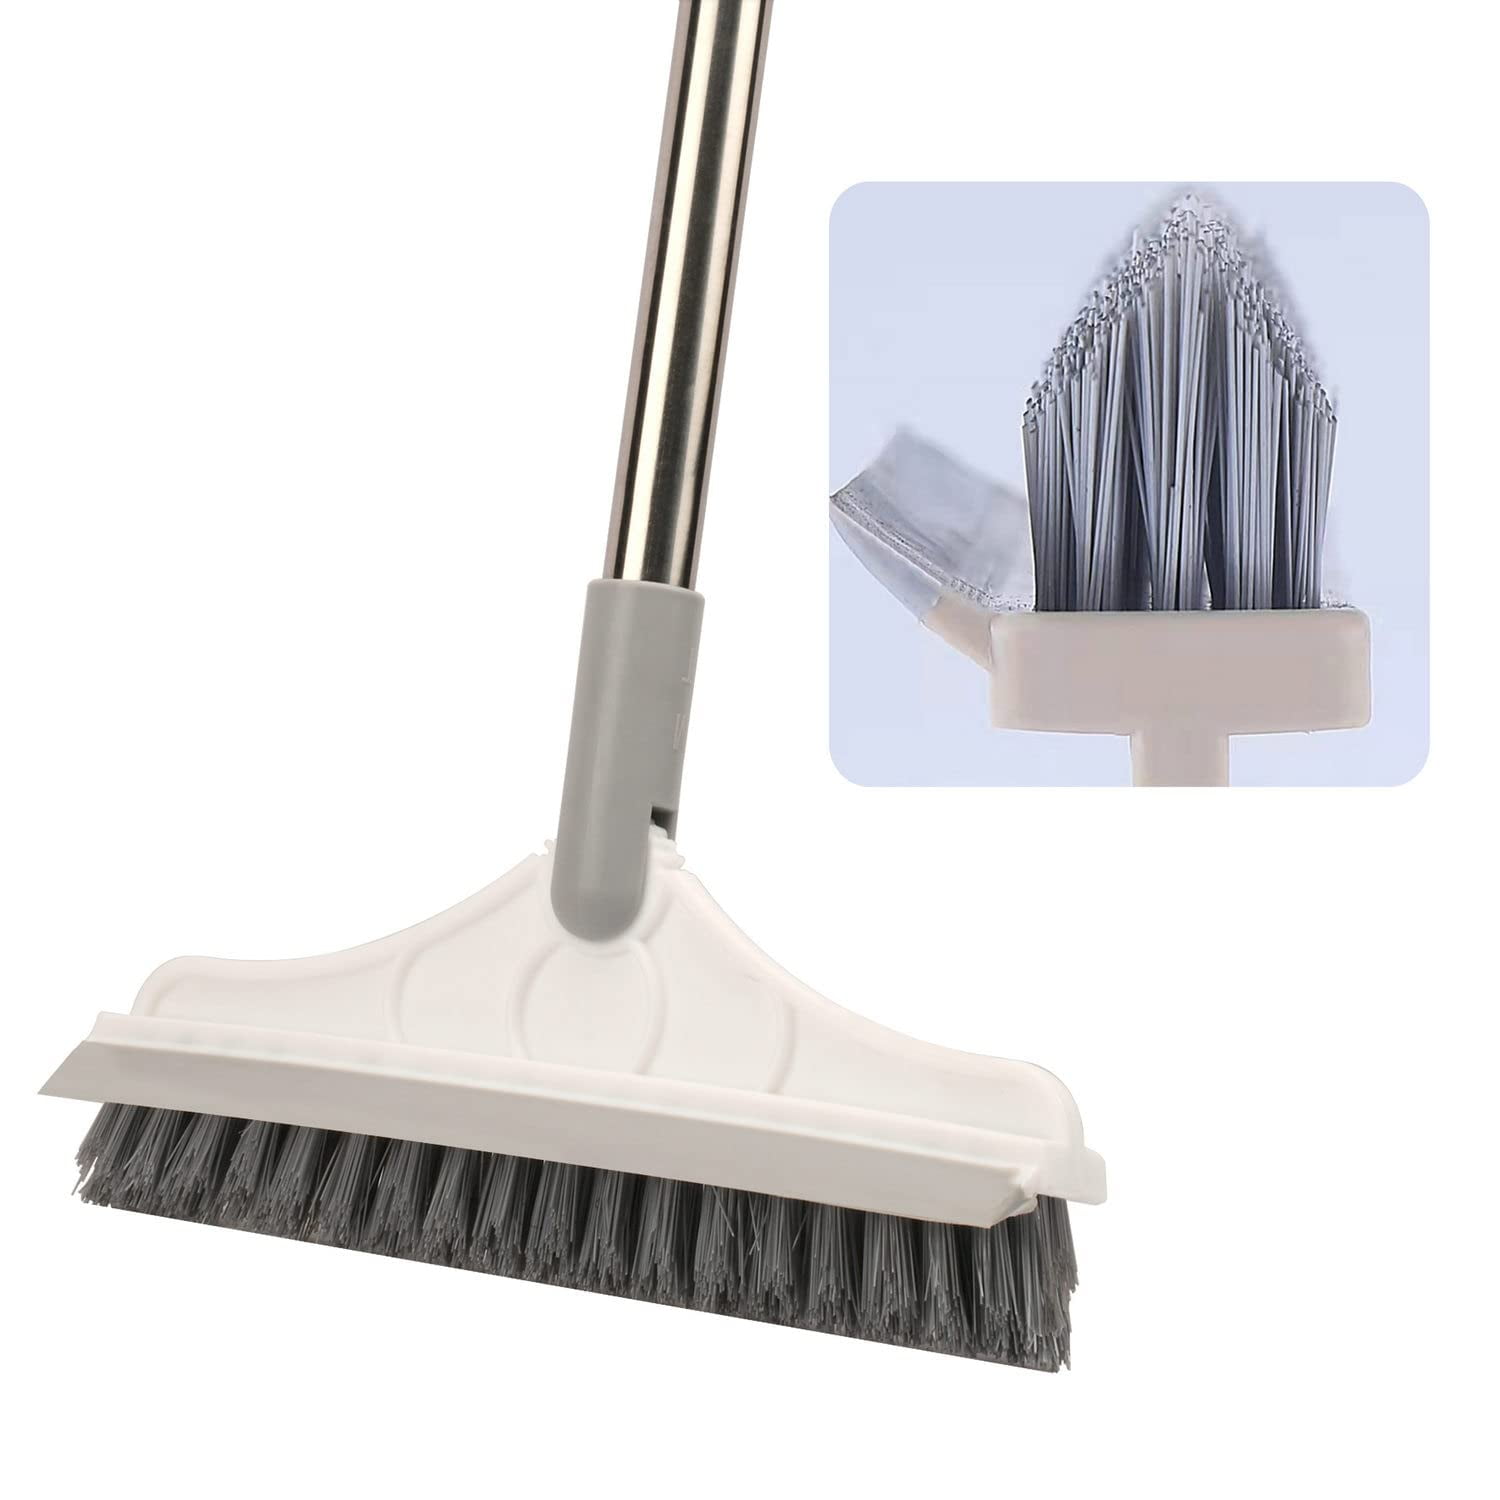 Ittar Grout Brush and Floor Scrub Brush with Long Handle, Stiff Bristles Grout Brush, Extendable Cleaning Brush Set for Floor, Tile, Deck, Patio